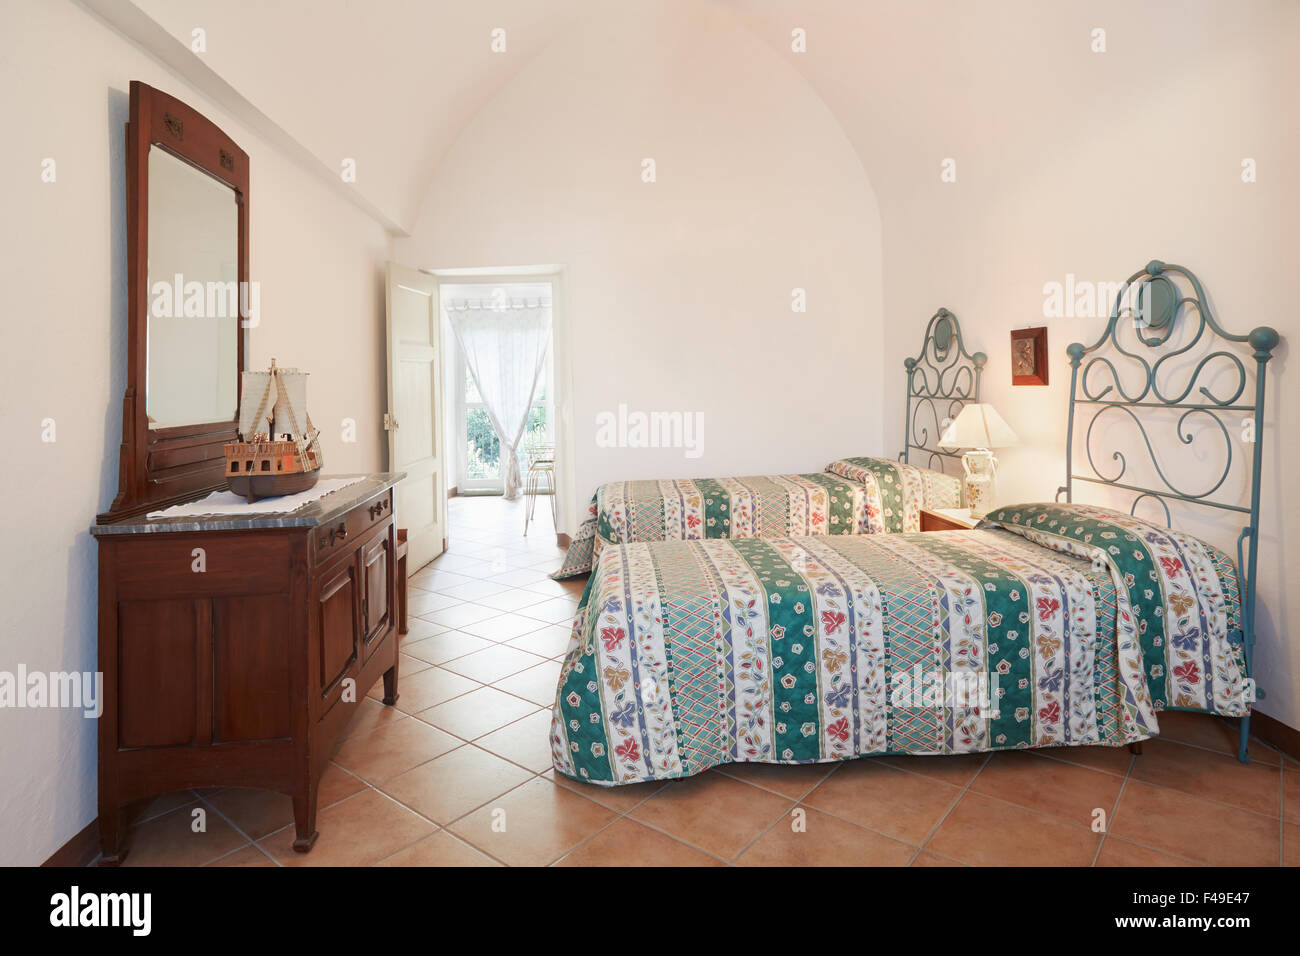 Old bedroom with two beds in ancient interior Stock Photo